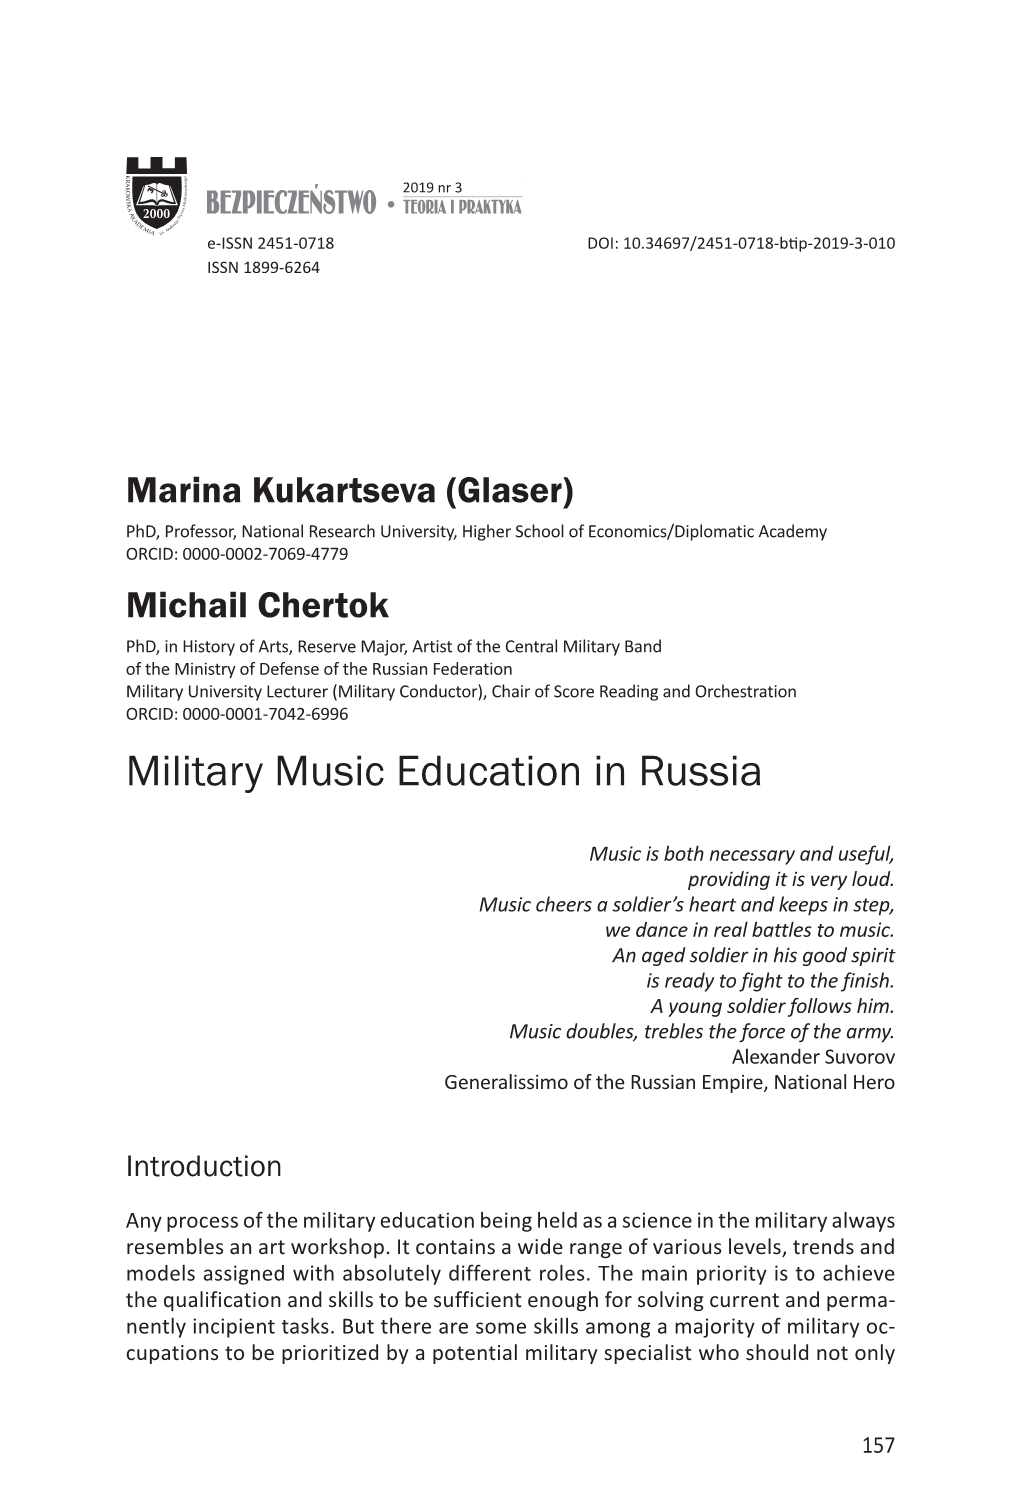 Military Music Education in Russia